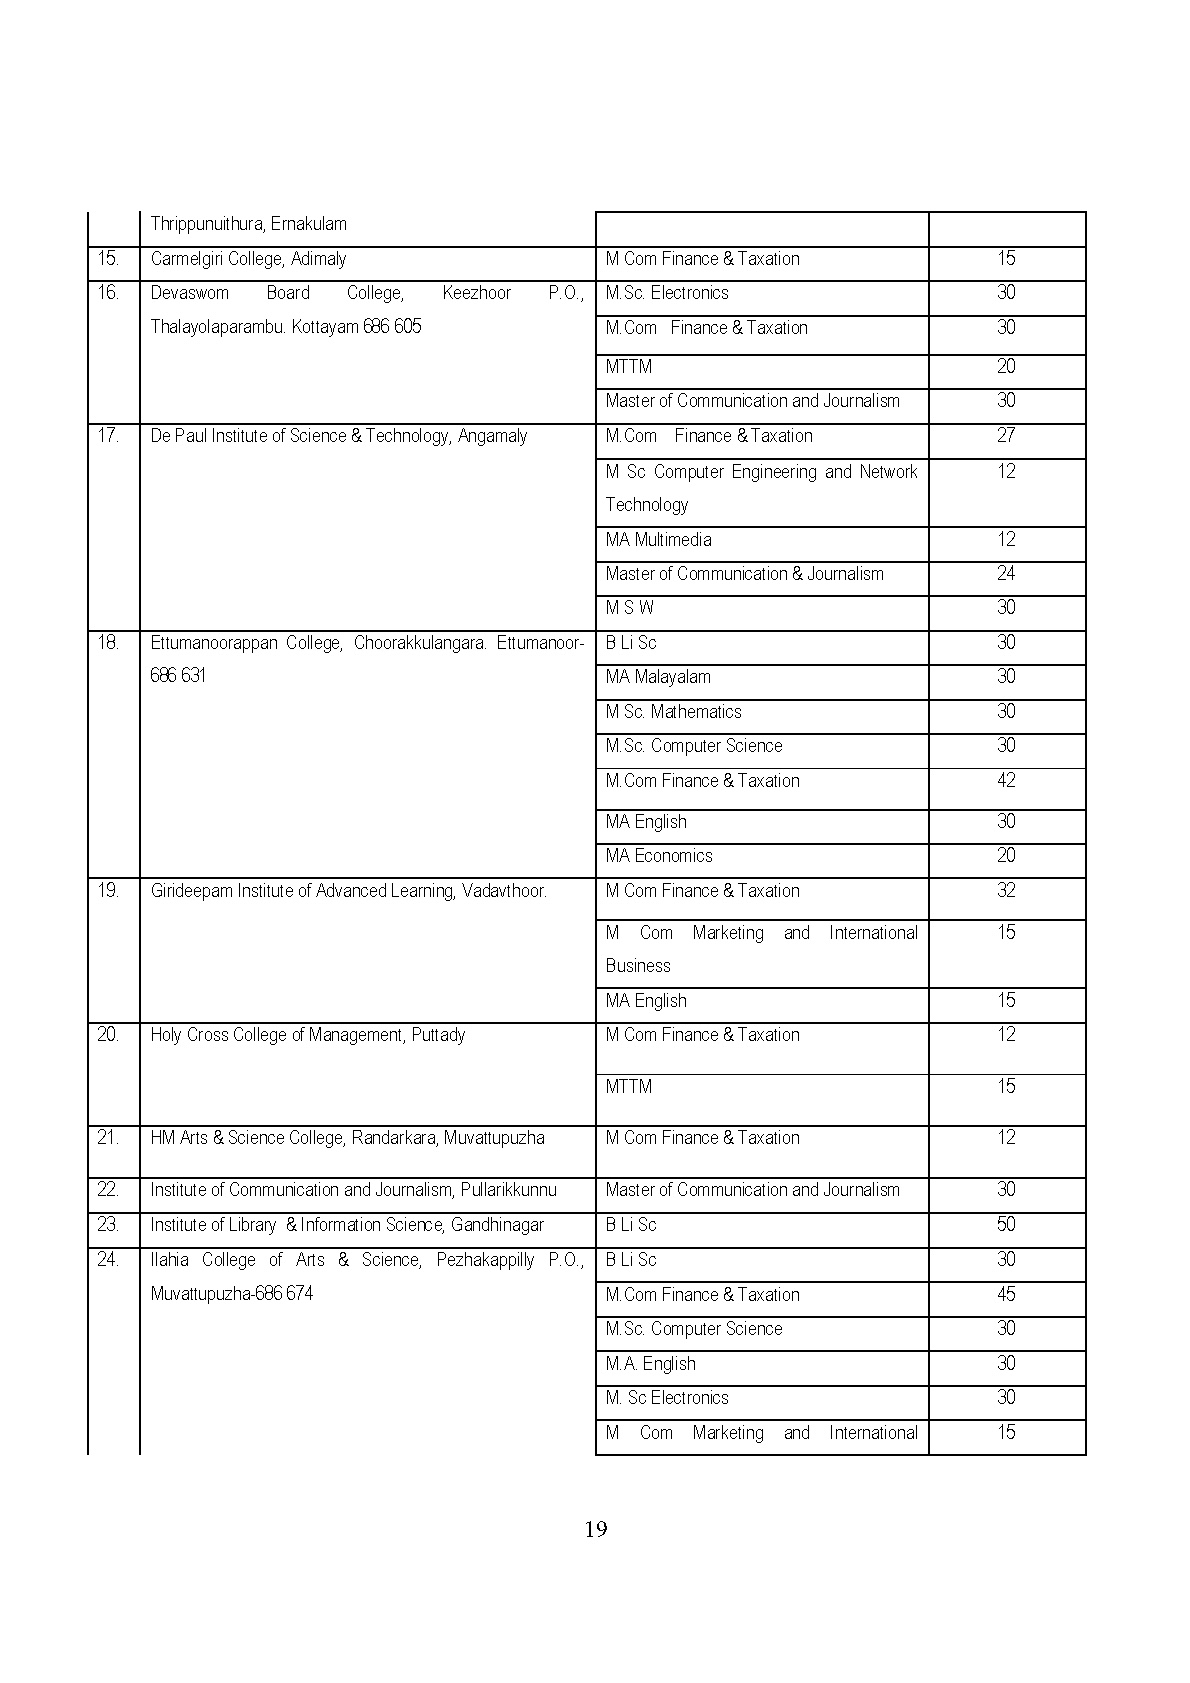 List of Unaided Arts and Science Colleges of MG University 2019 - Notification Image 2